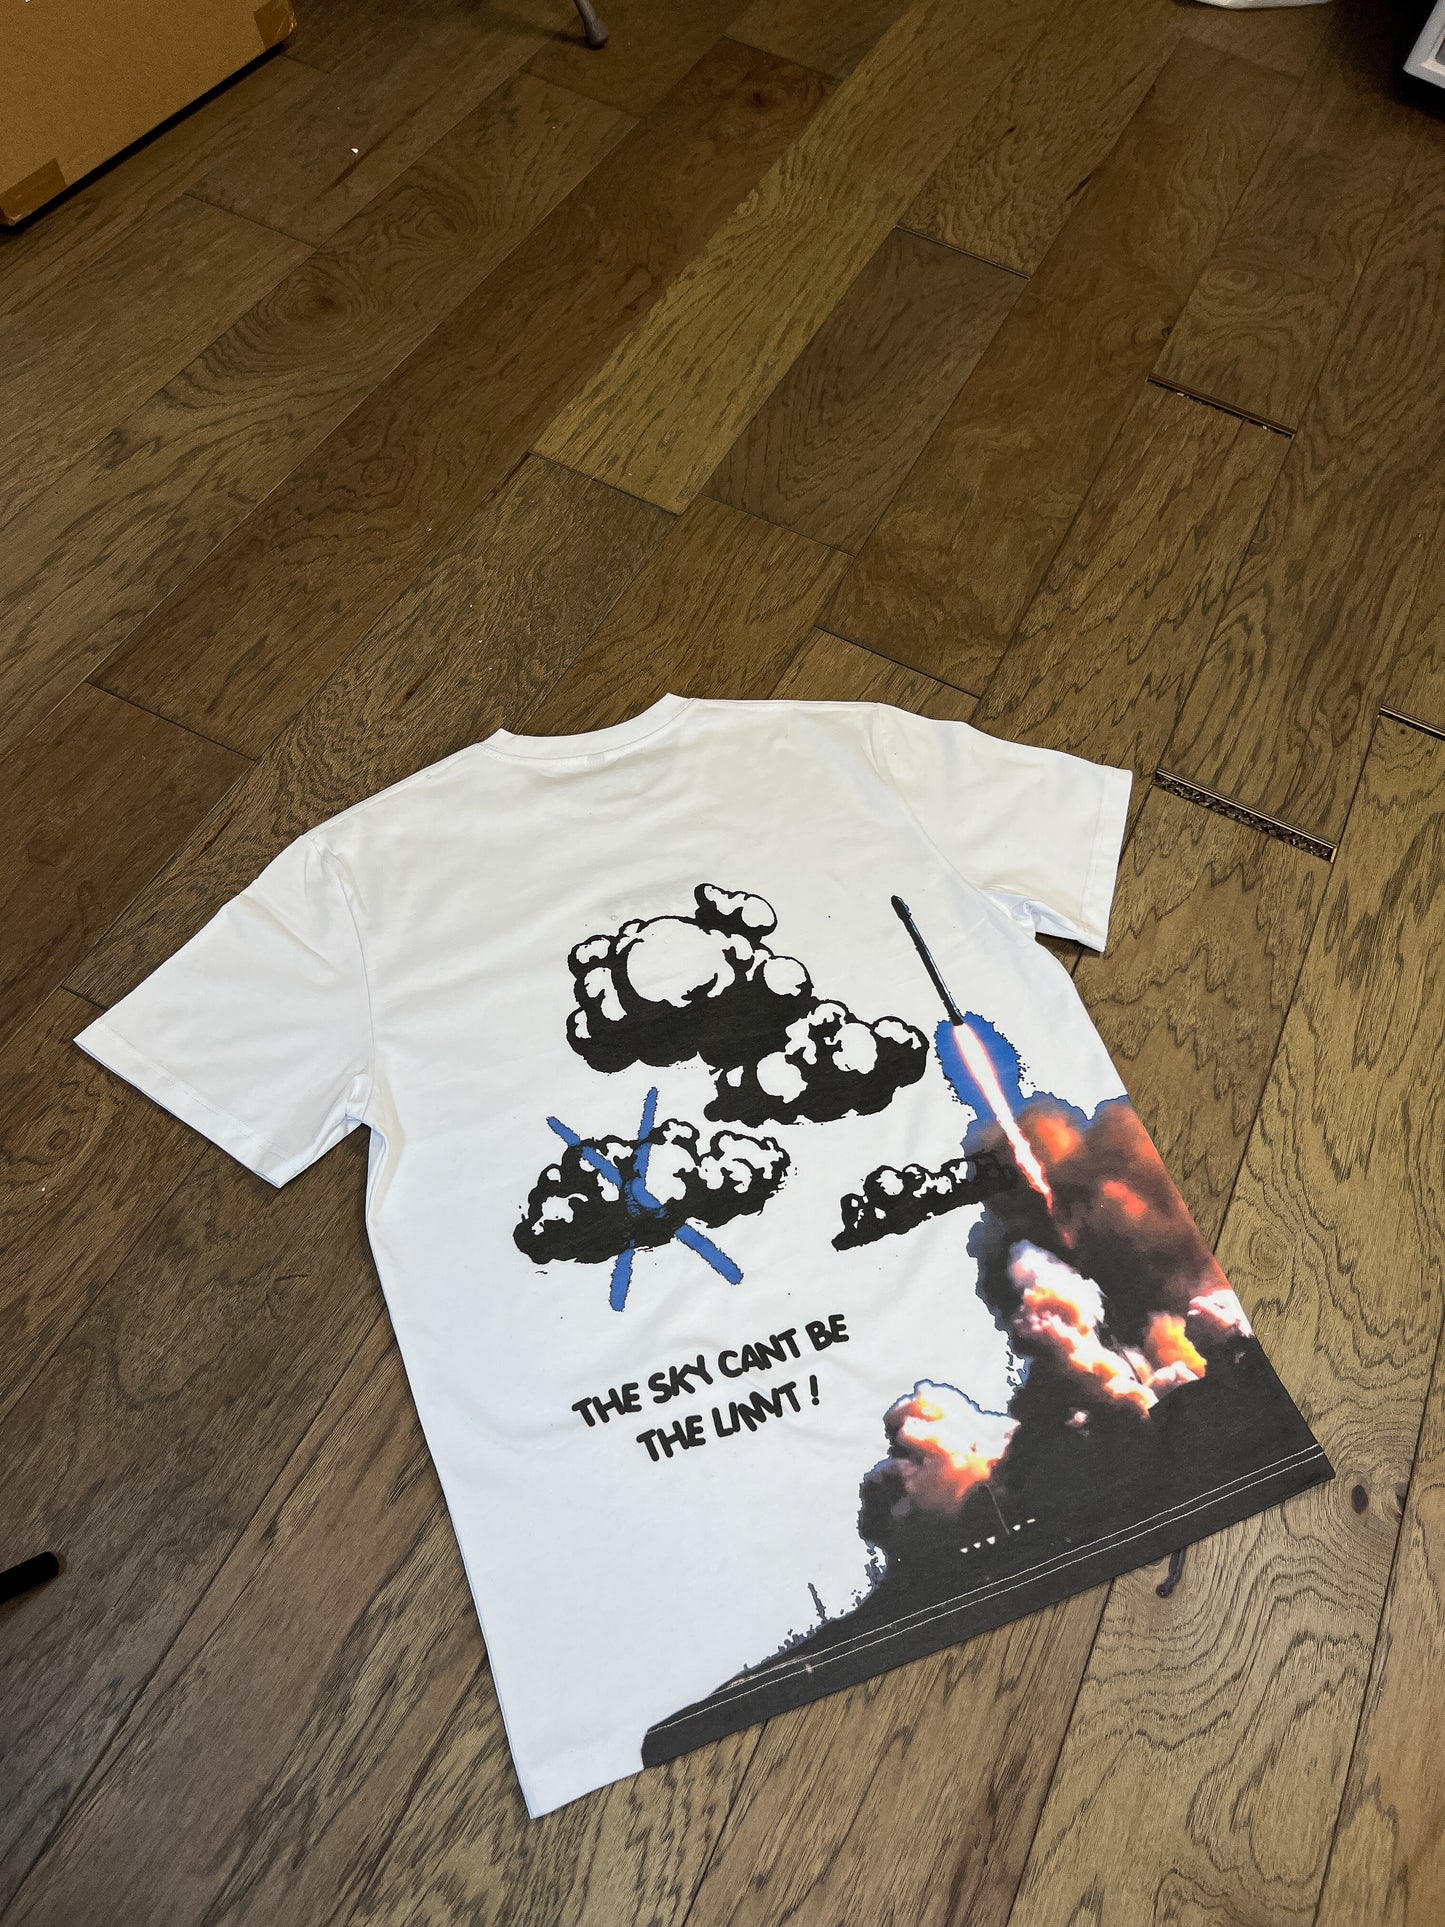 “Sky Can’t Be The Limit” White Tee